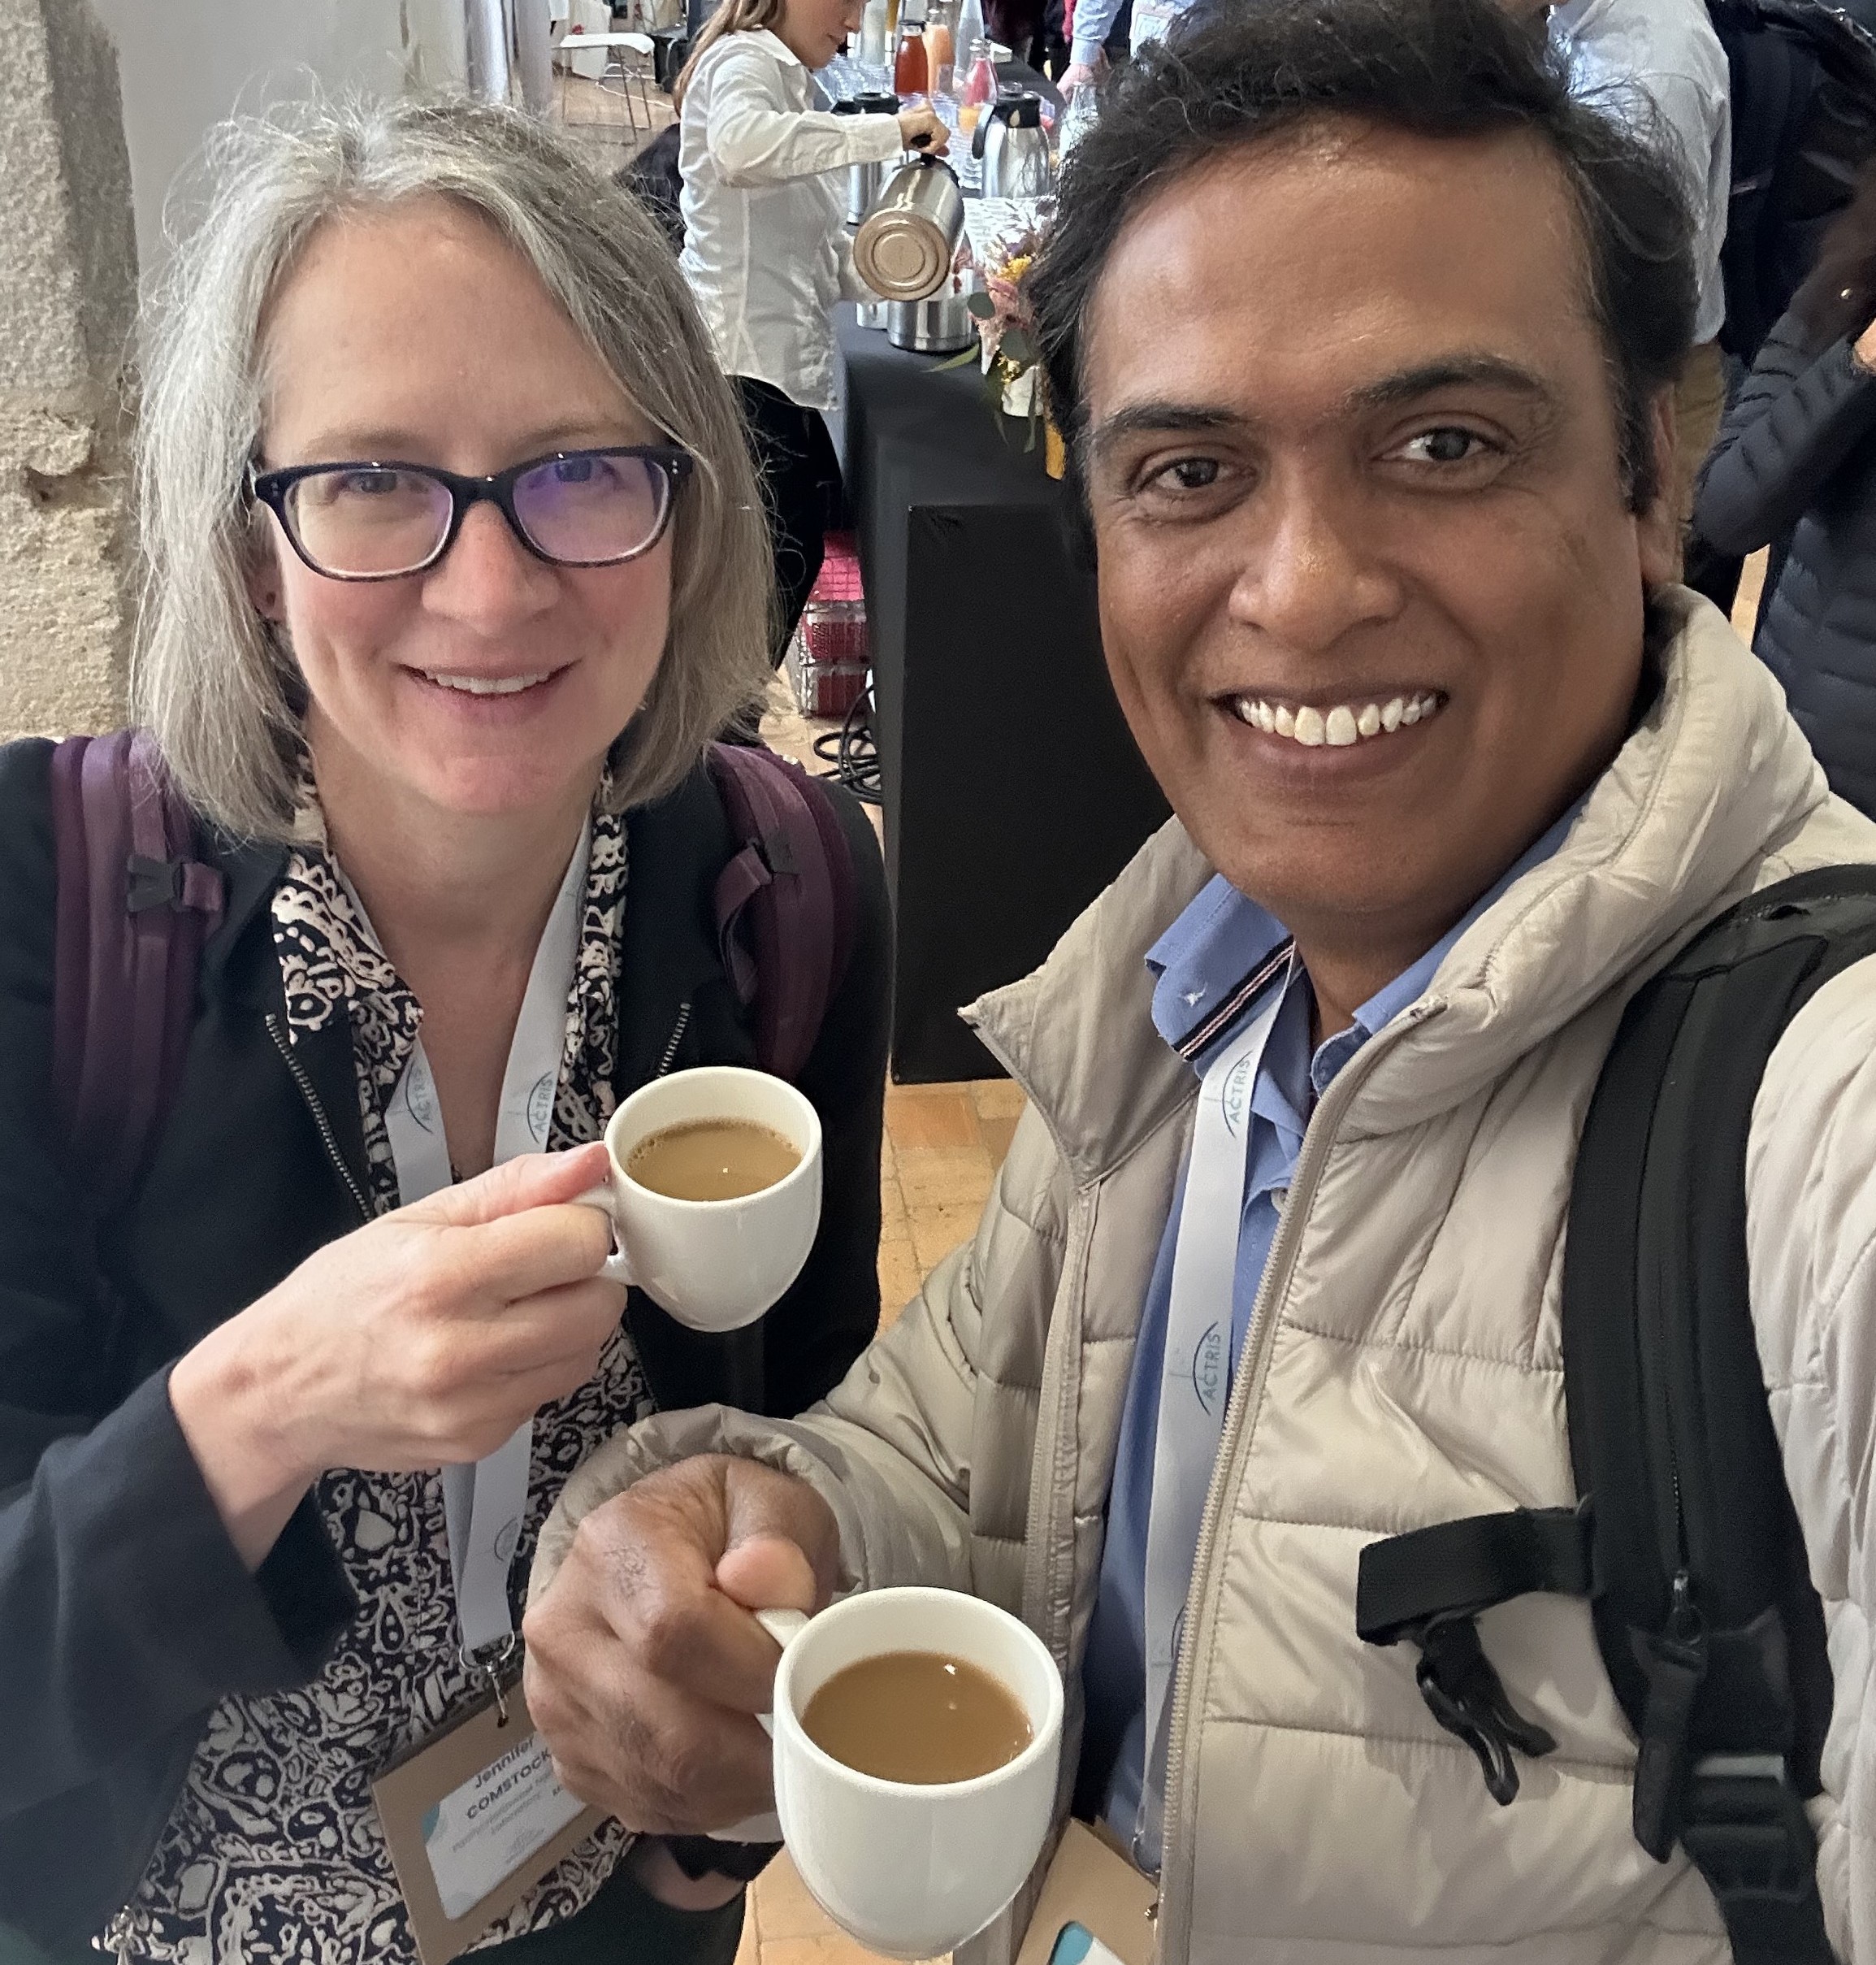 Jennifer Comstock and Giri Prakash, who are each holding a mug of coffee in their right hand, huddle together and smile in the frame.